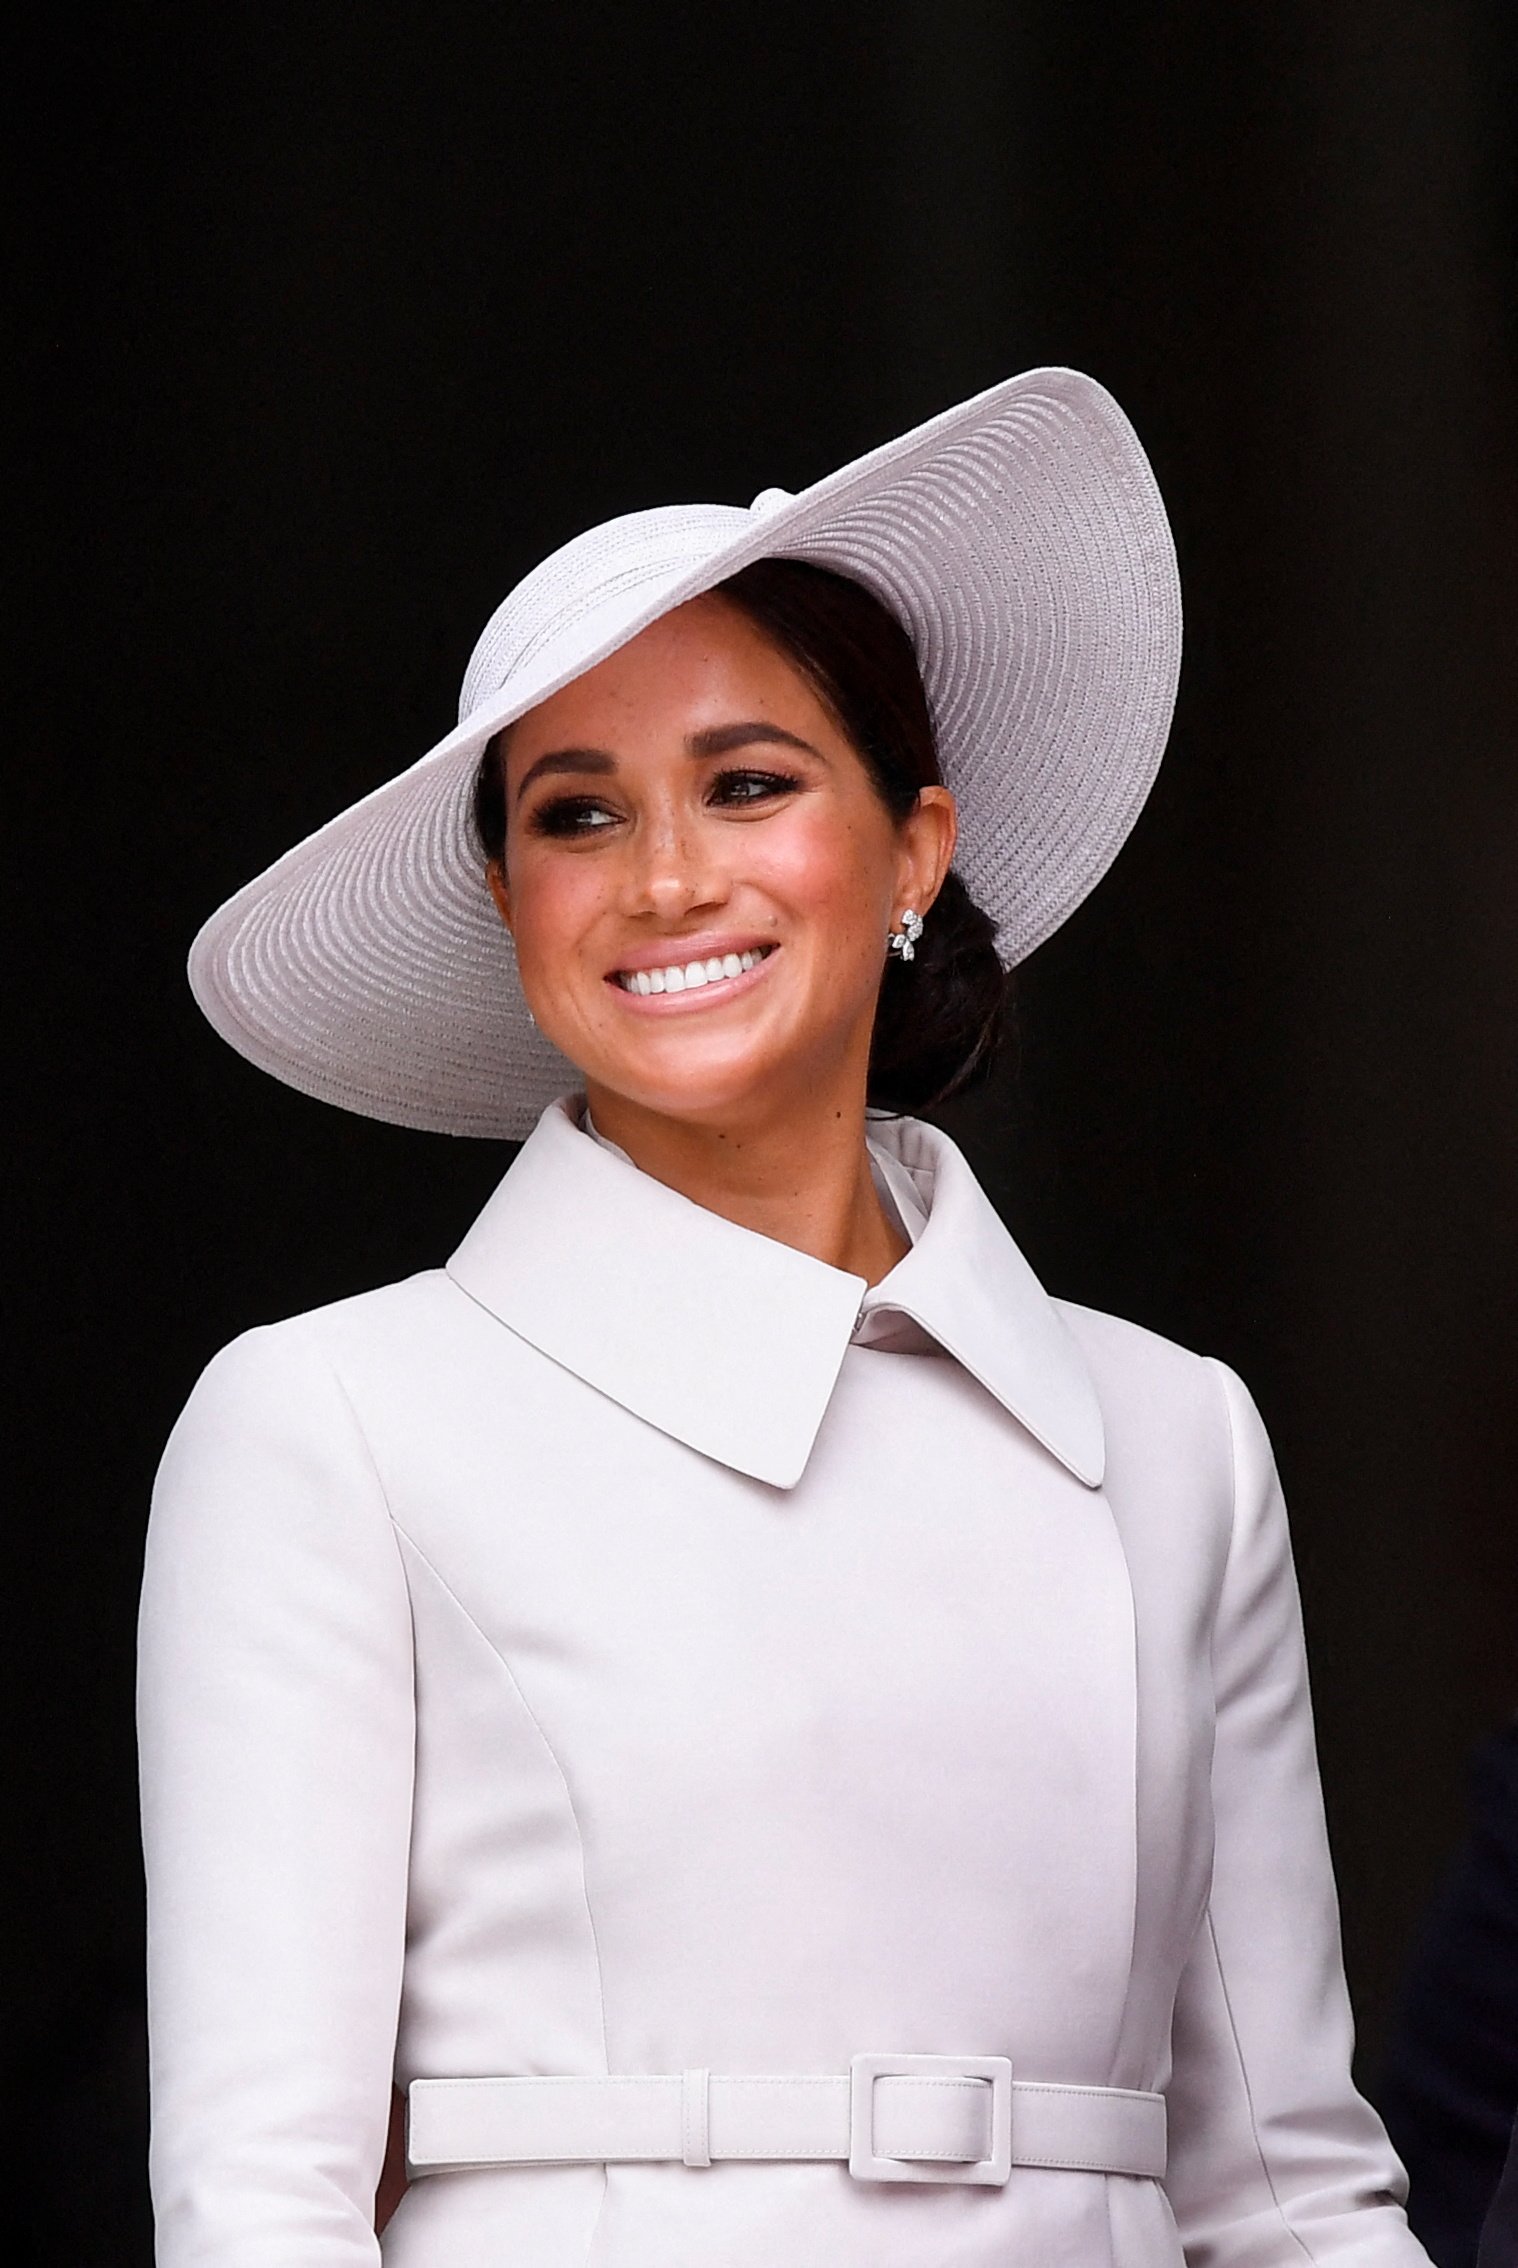 Britain's Meghan, Duchess of Sussex, attend the National Service of Thanksgiving for The Queen's reign at Saint Paul's Cathedral in London on June 3, 2022. | Source: Getty Images